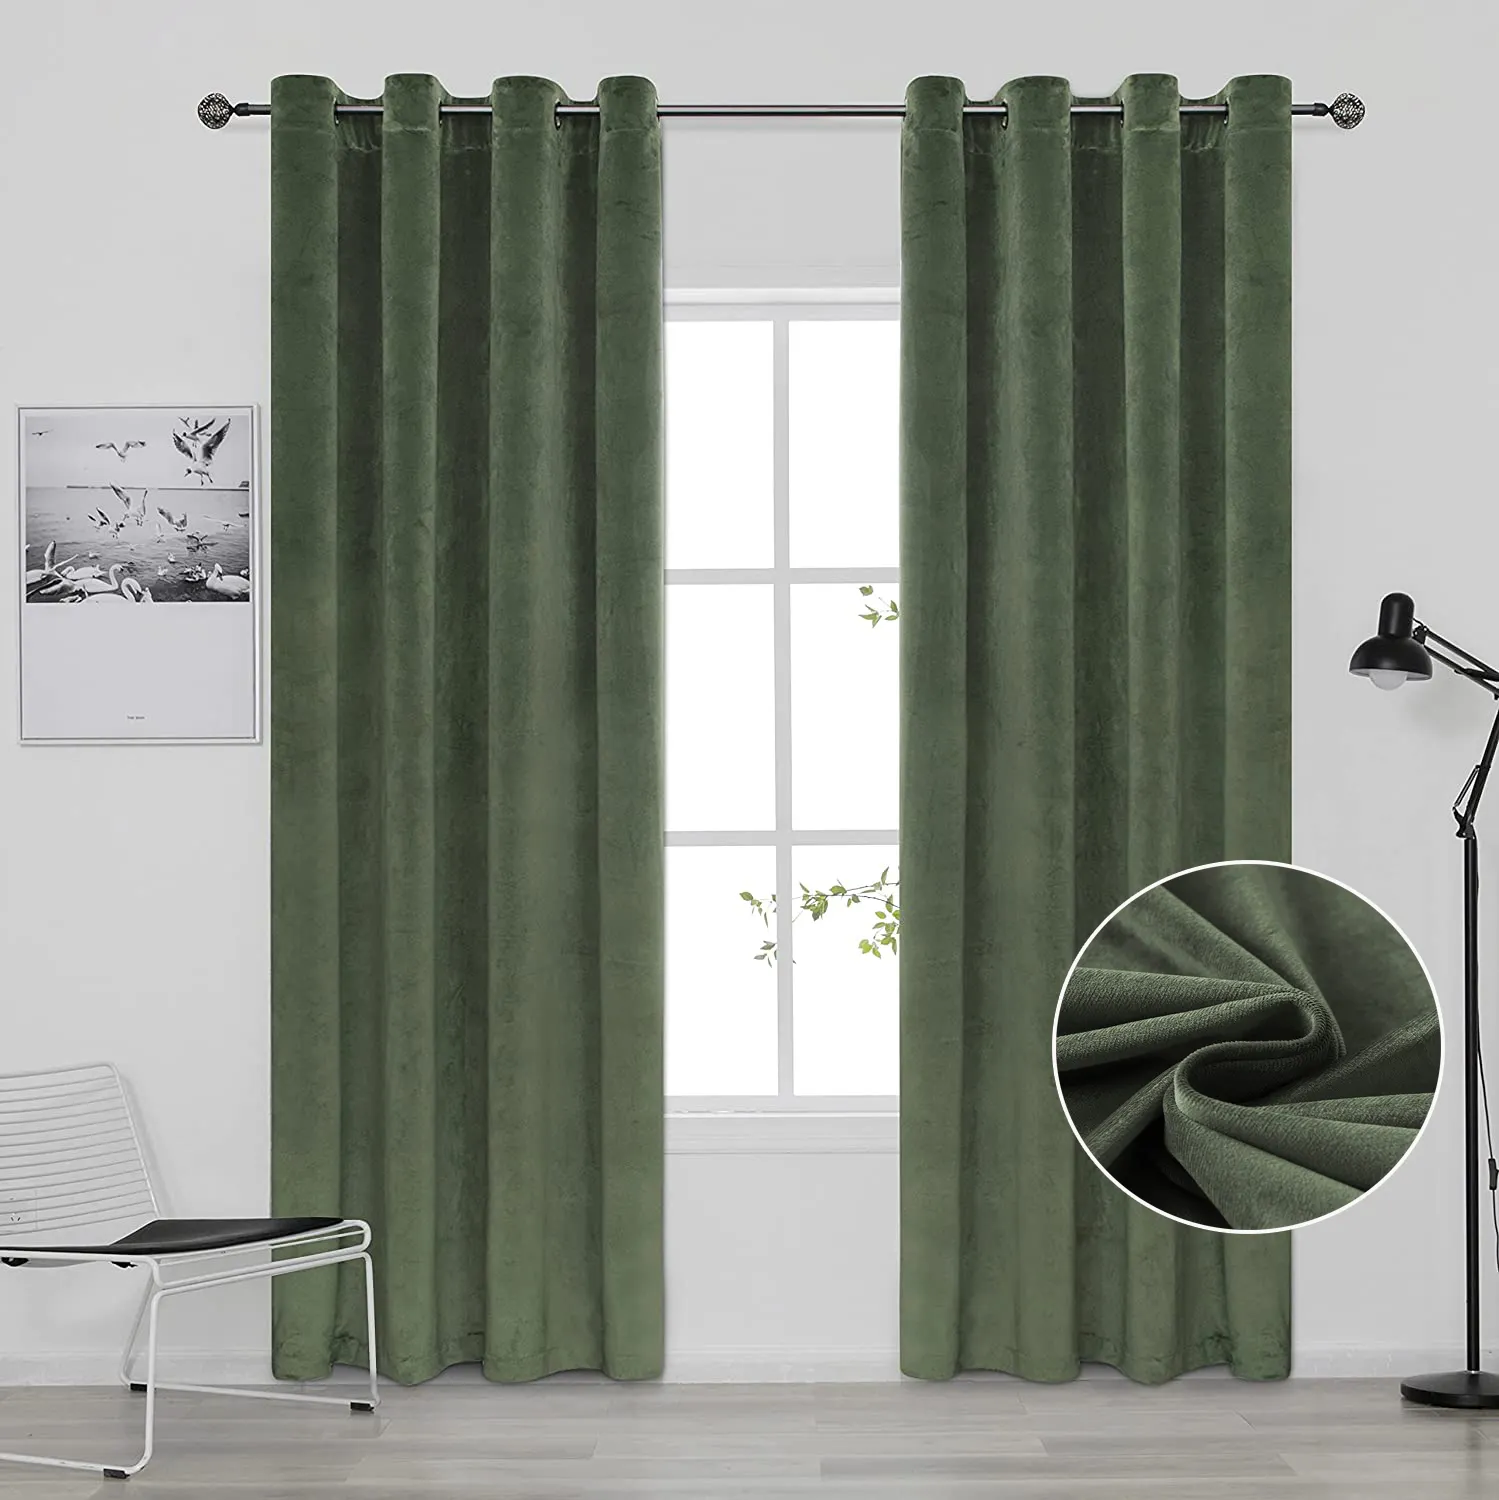 Wholesale Crushed Velvet Emerald Velour Blackout Windows Curtains Green For The Living Room Bedroom Ready Made